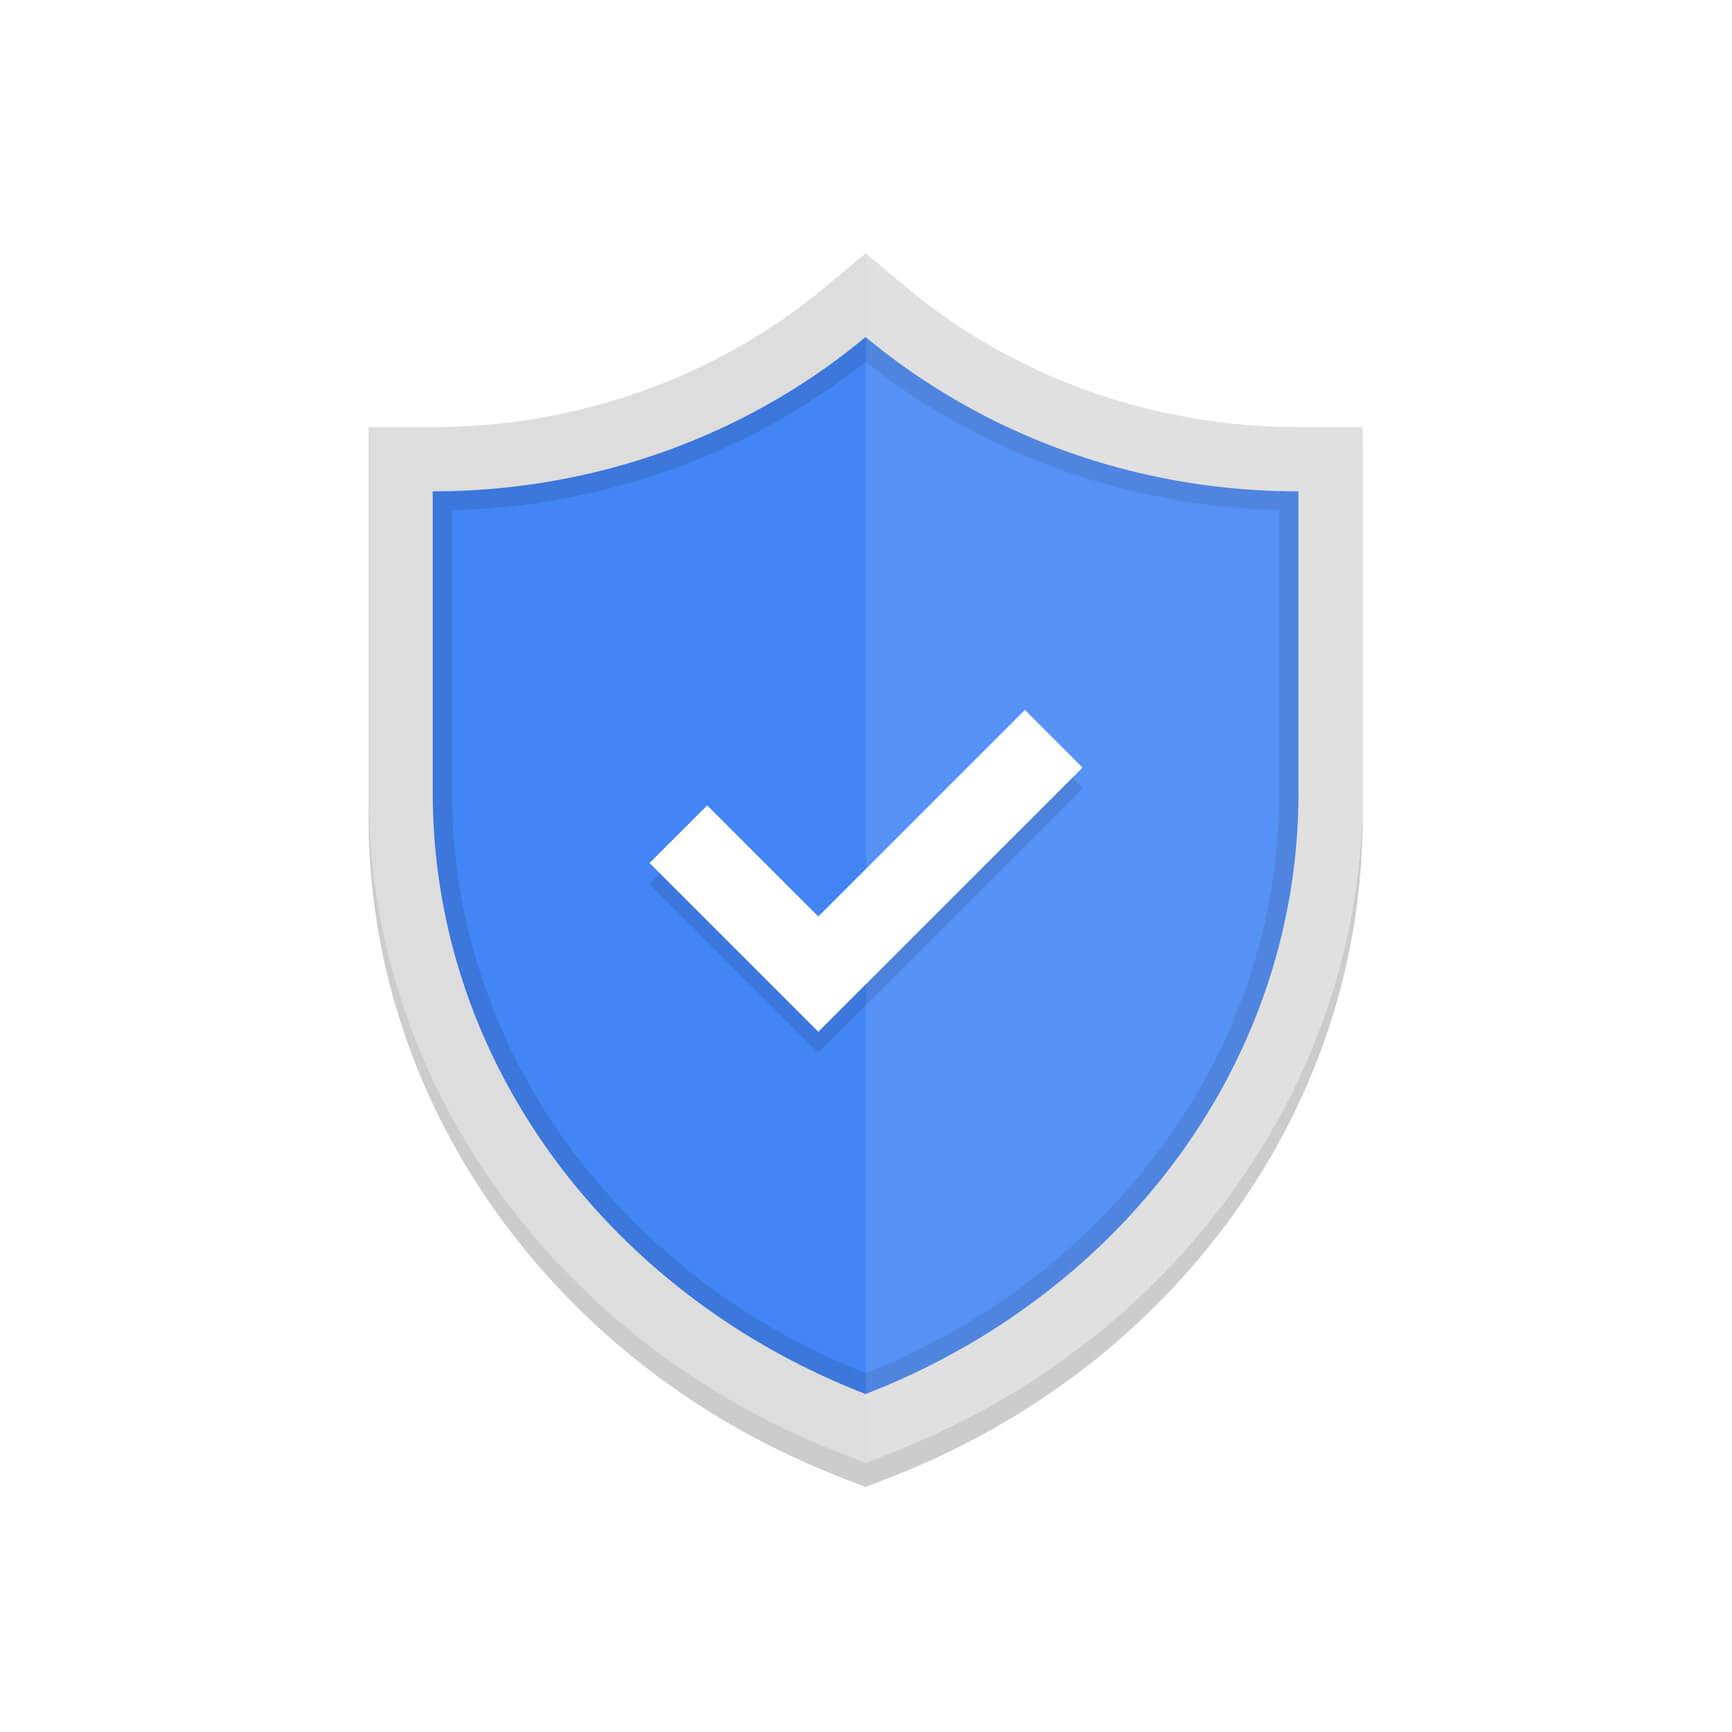 Blue badge icon with shield and check mark. Modern flat vector illustration.